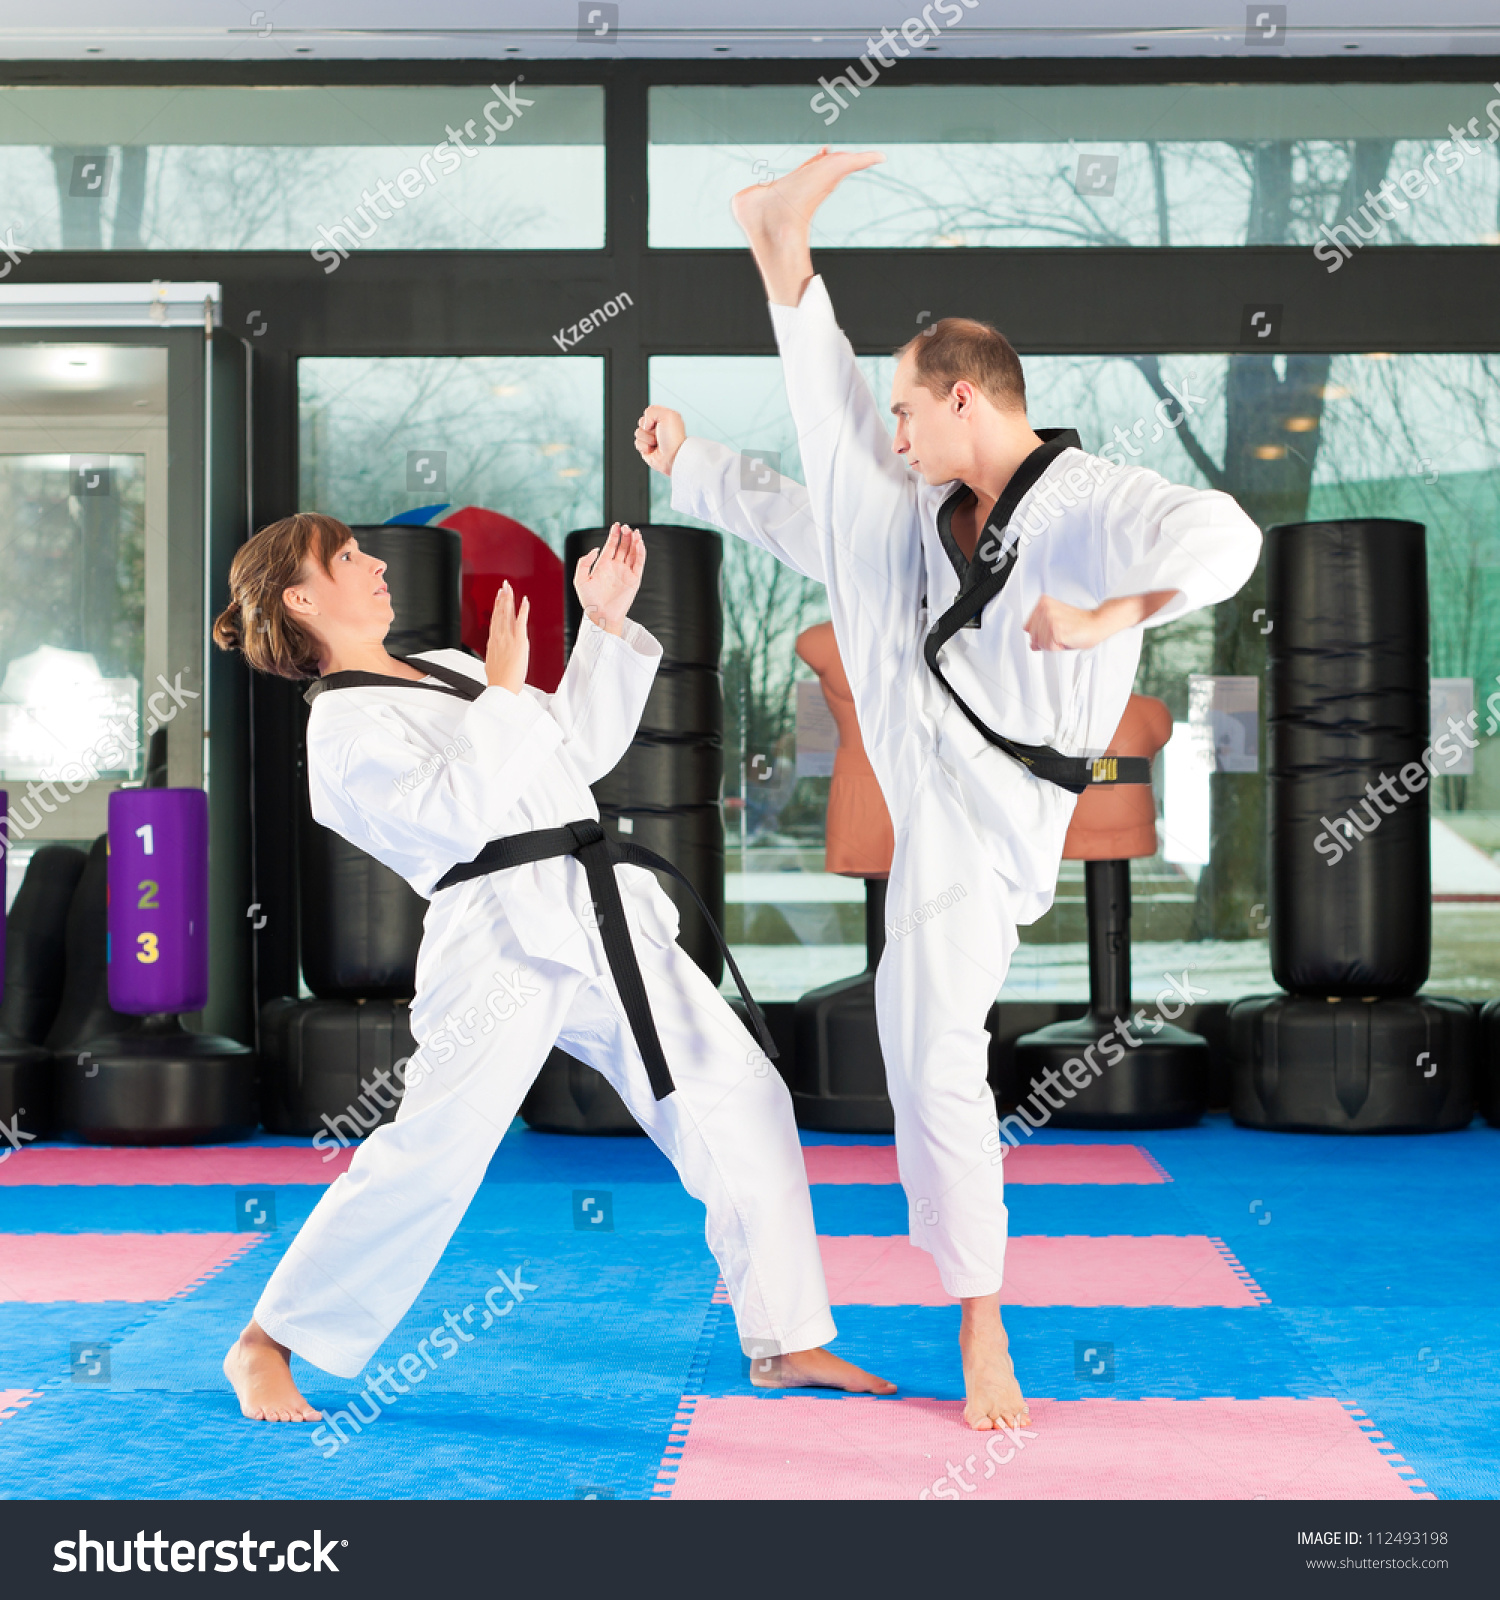 People in a gym in martial arts training exercising Taekwondo, both have a black belt #112493198